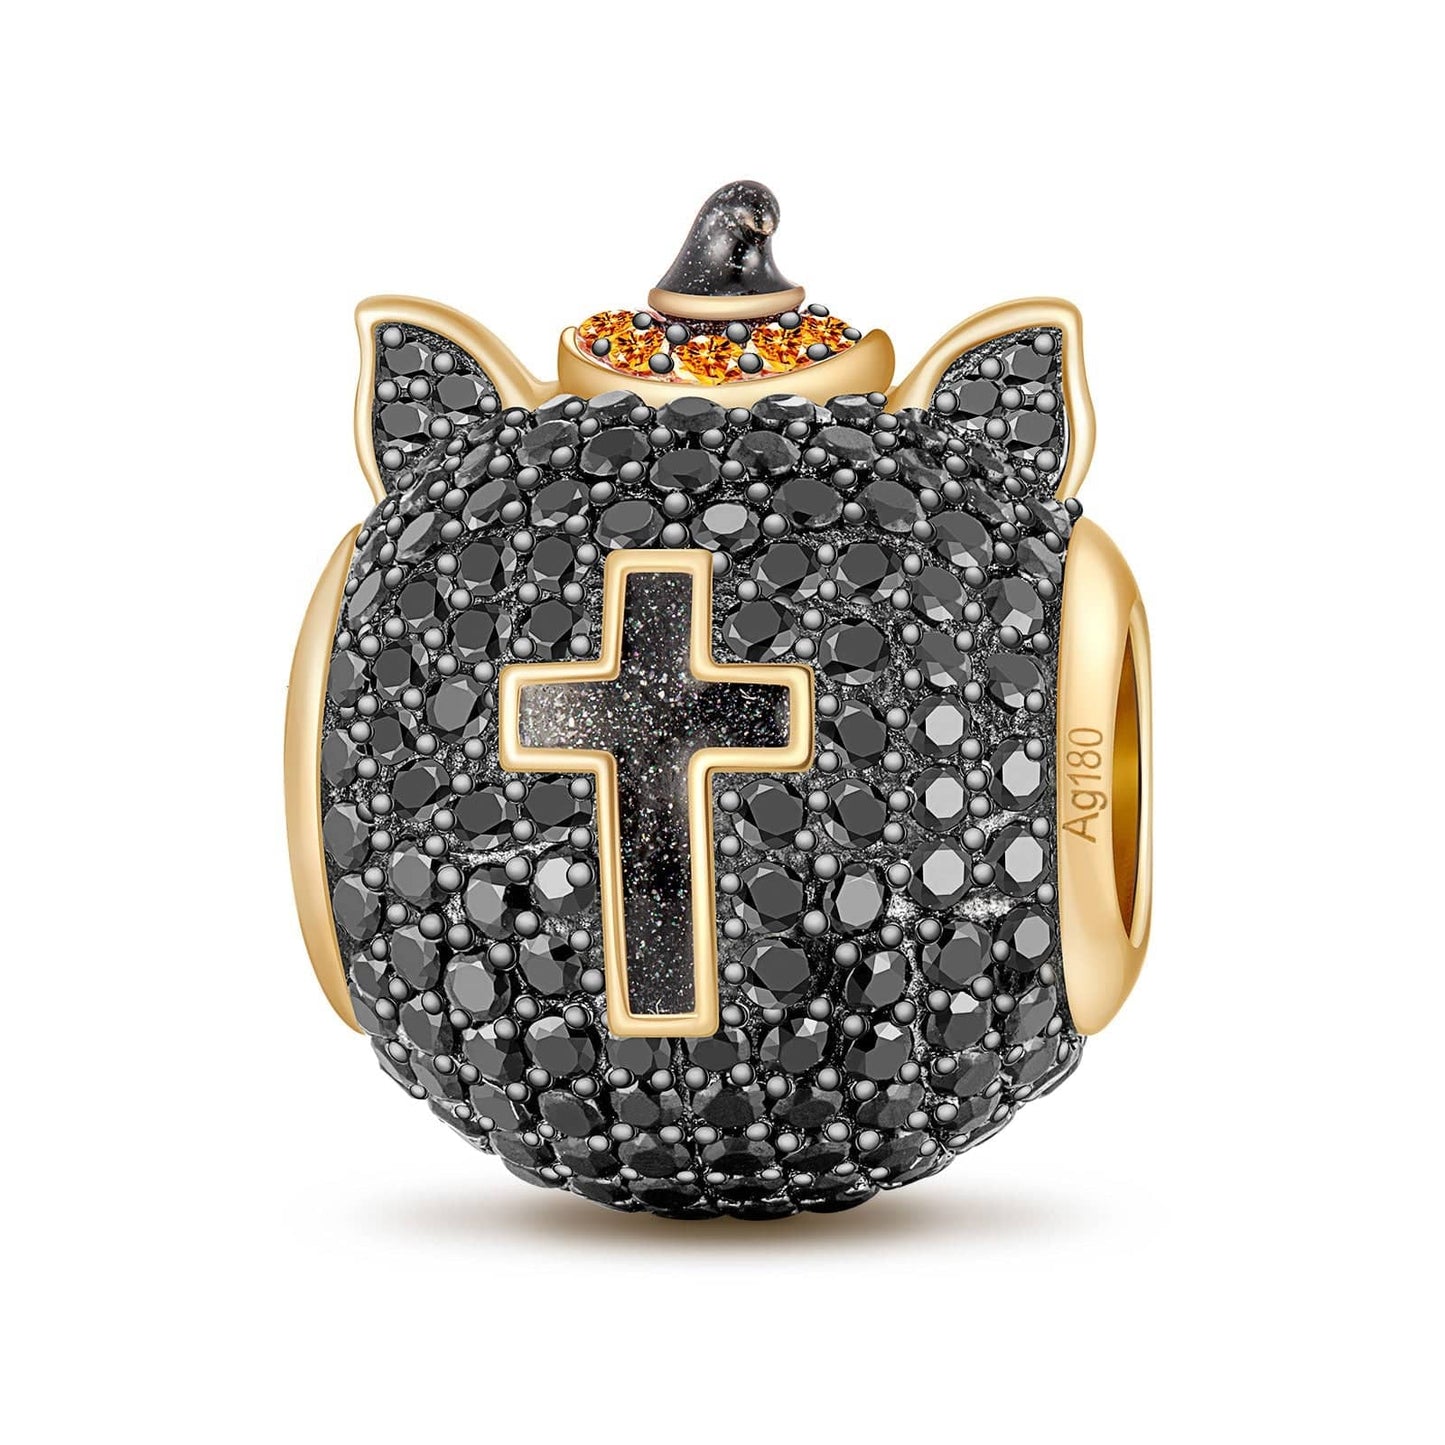 Halloween Black Cat Tarnish-resistant Silver Charms With Enamel In 14K Gold Plated